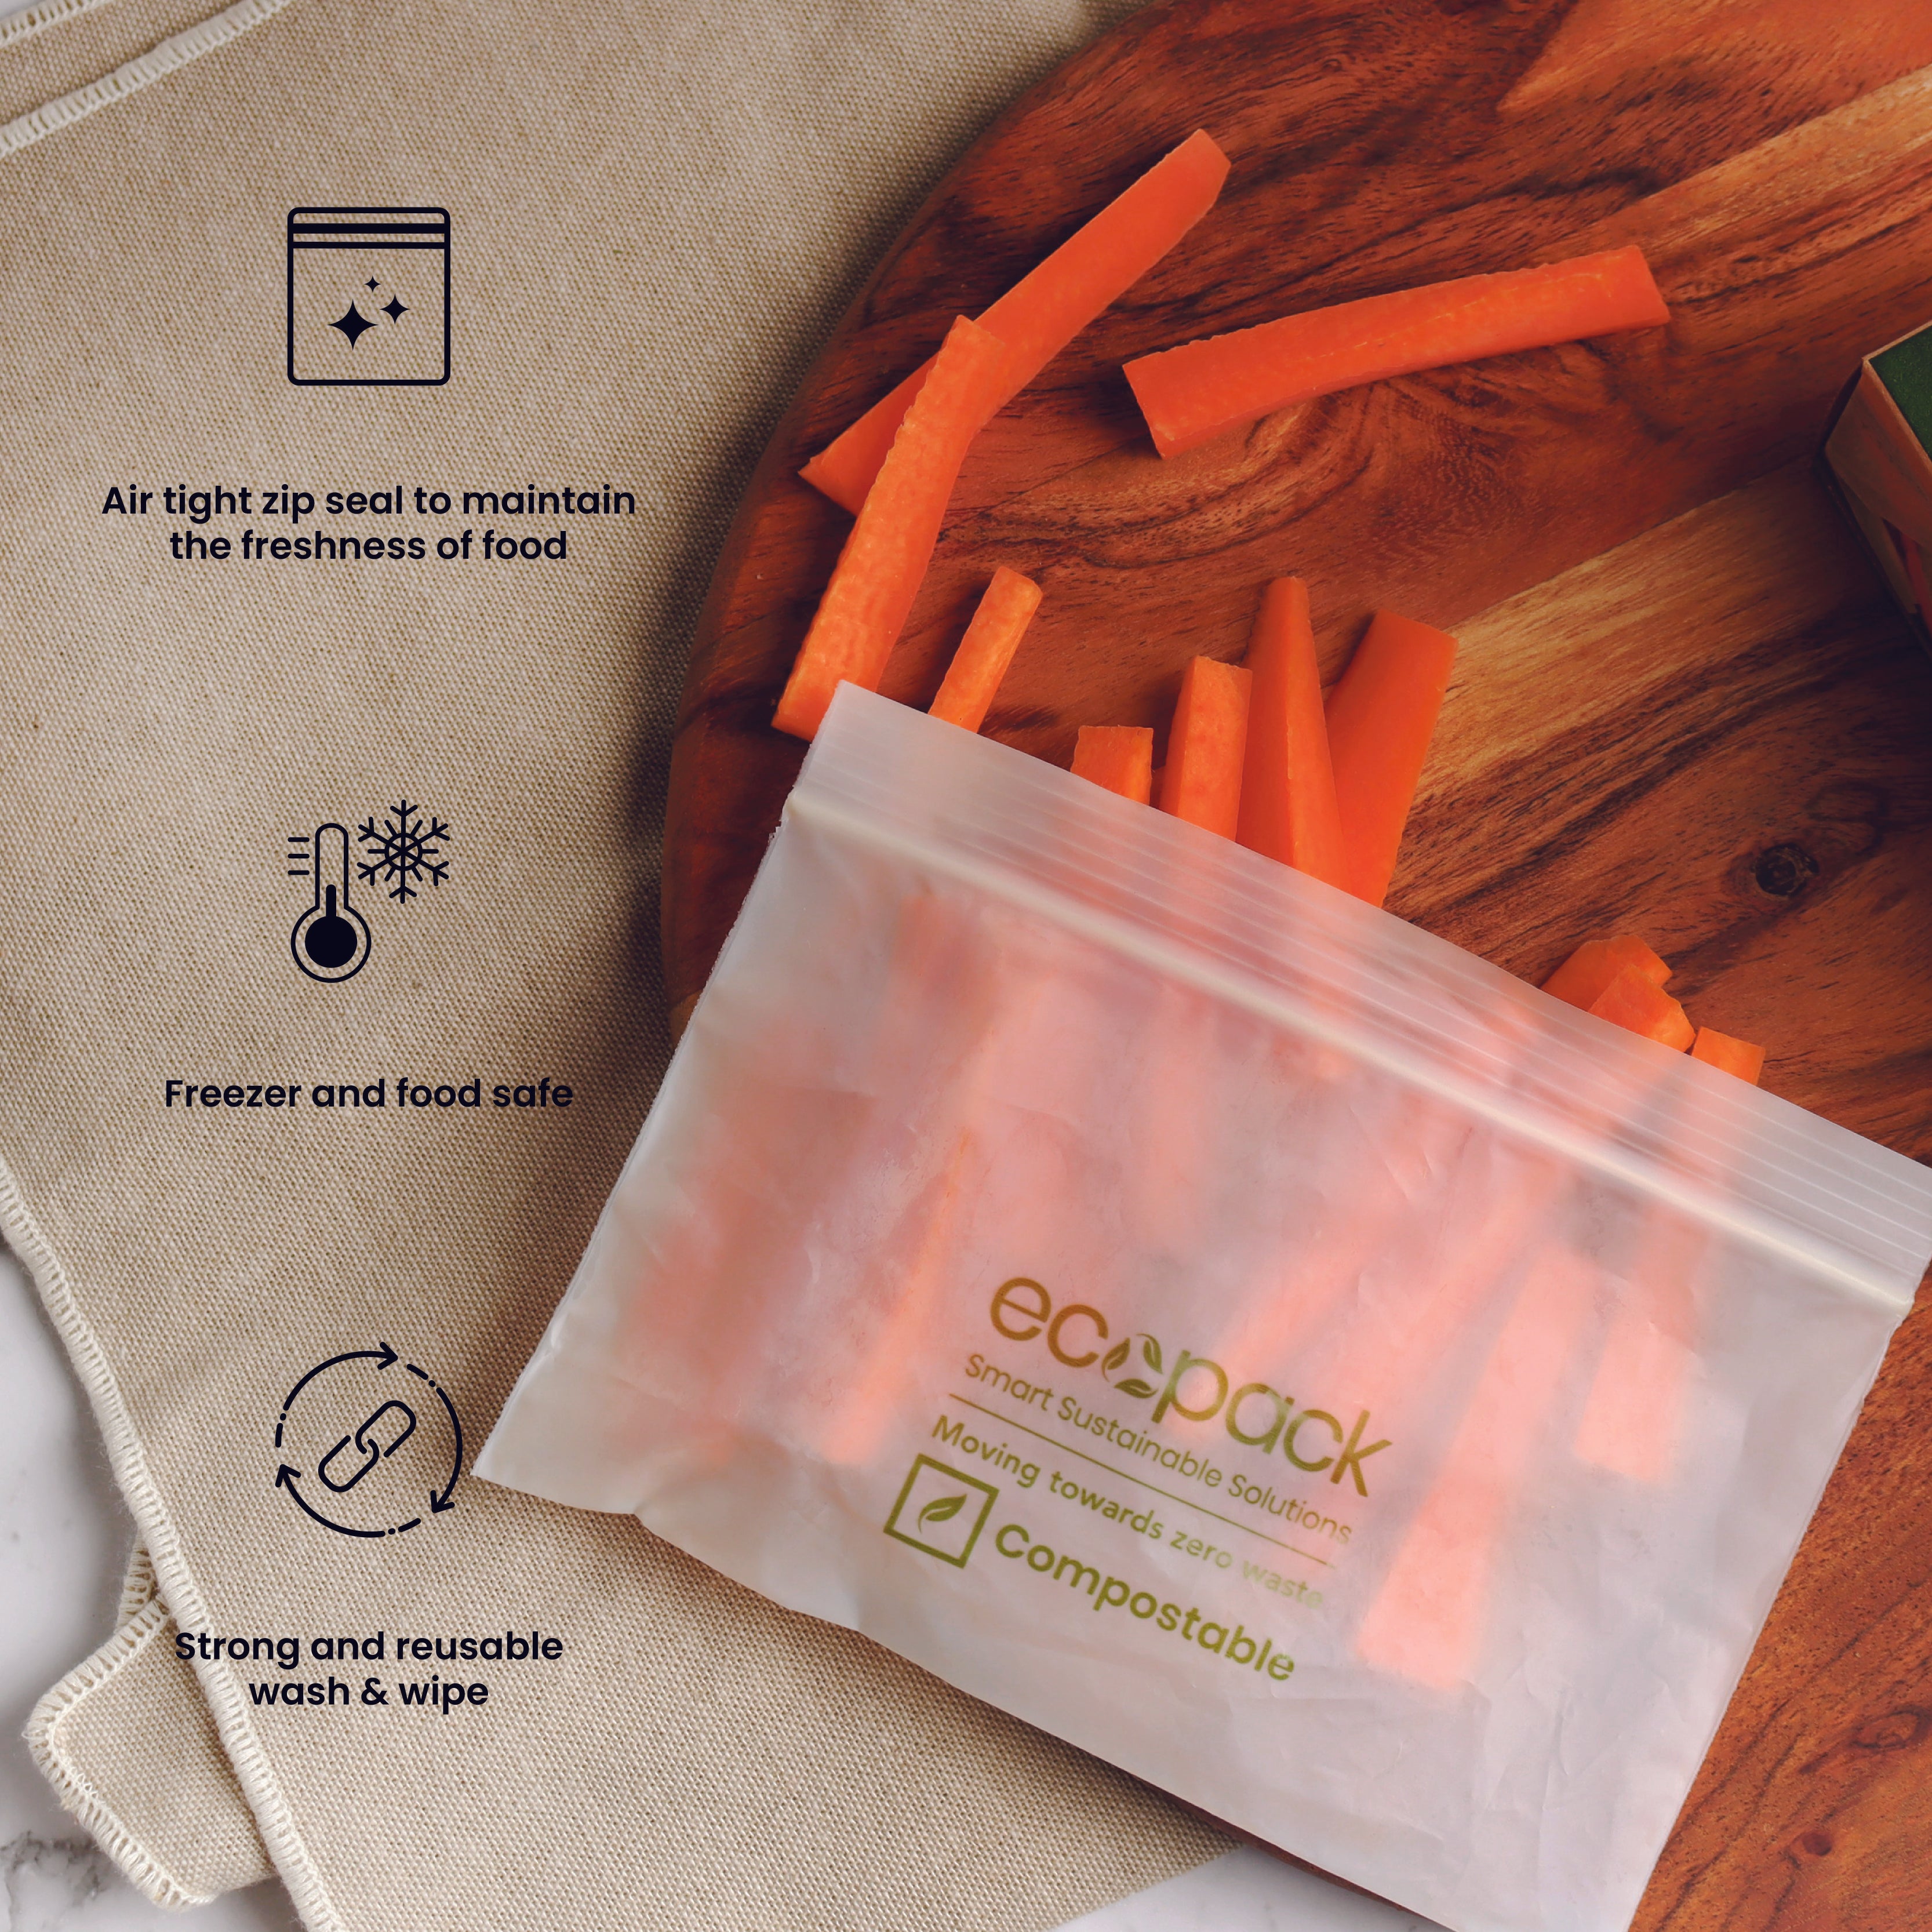 ED-2601 Compostable Resealable Snack Bags